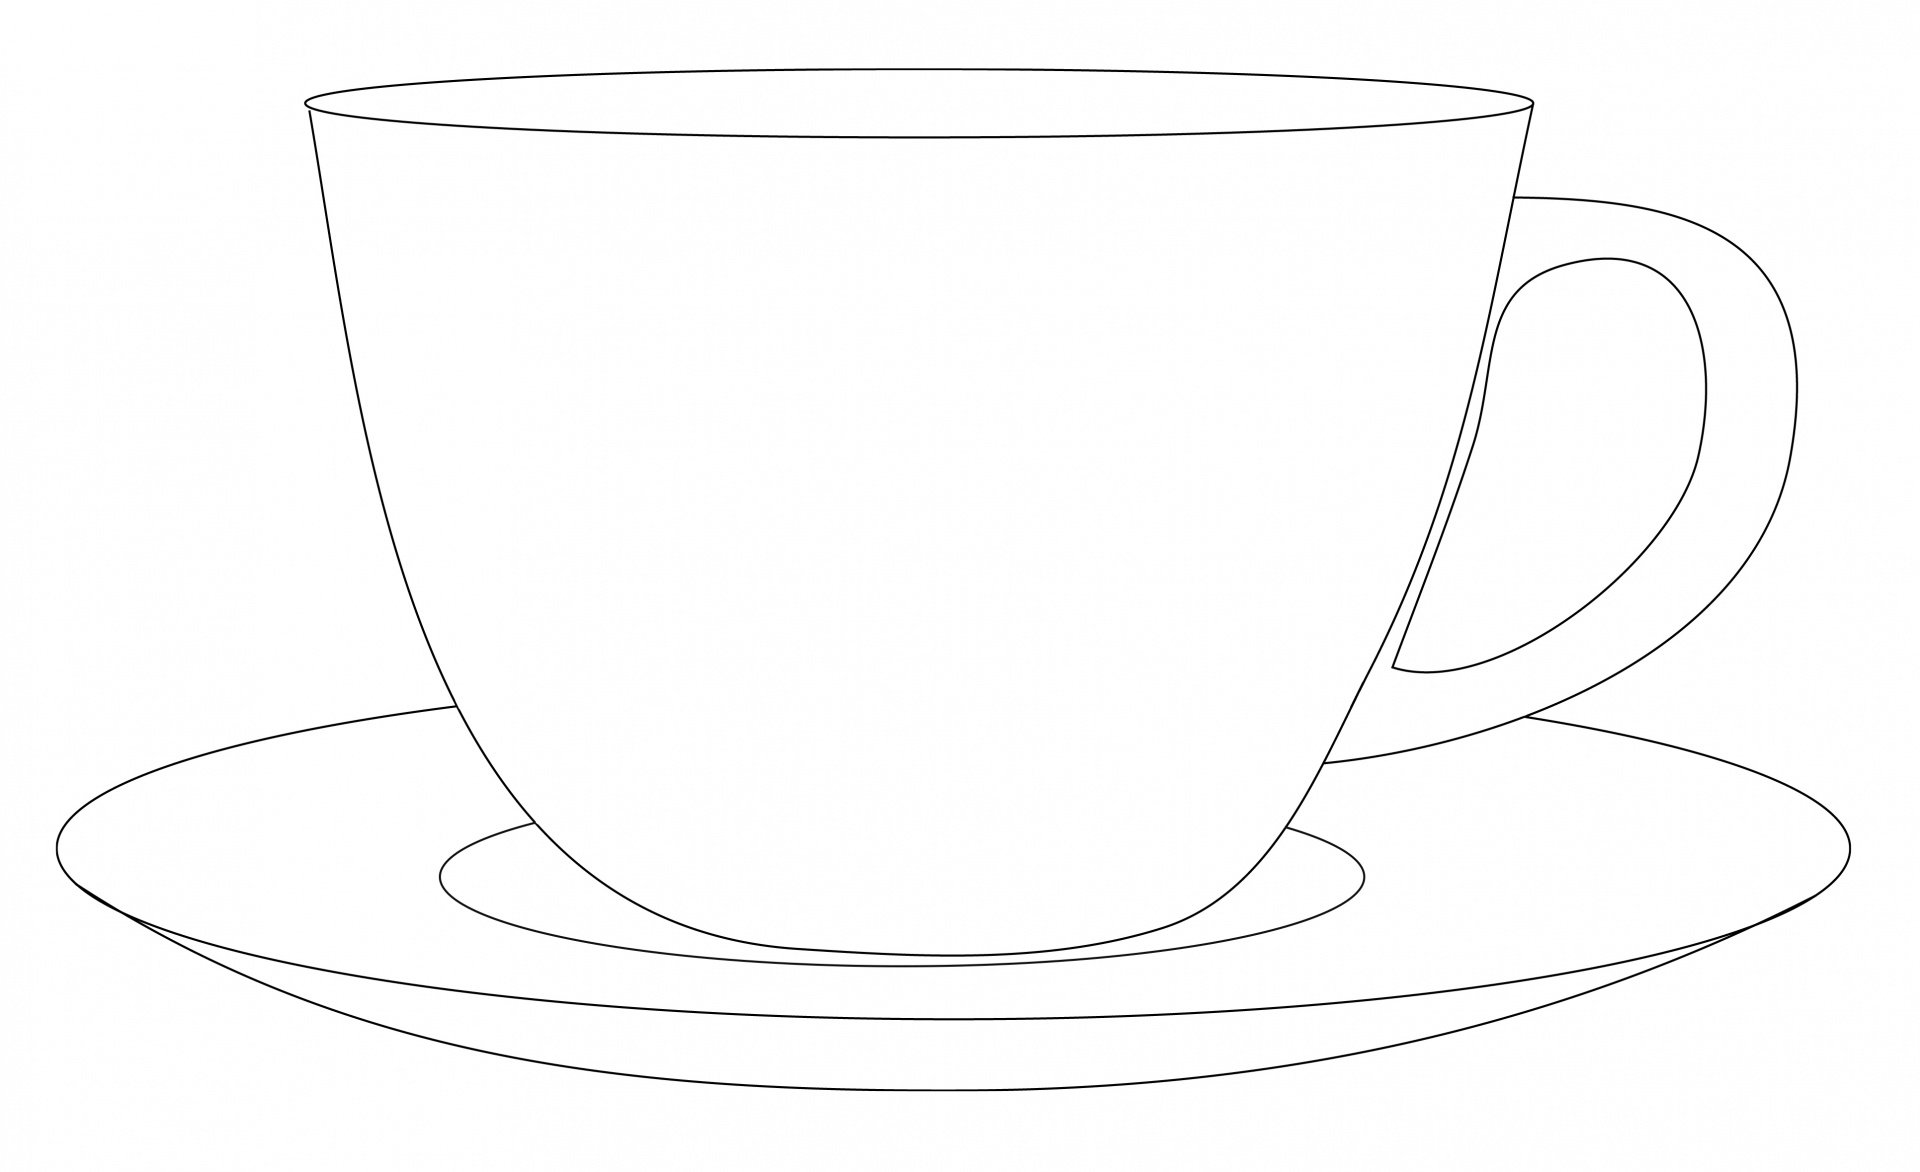 Exquisite applique cup and saucer template